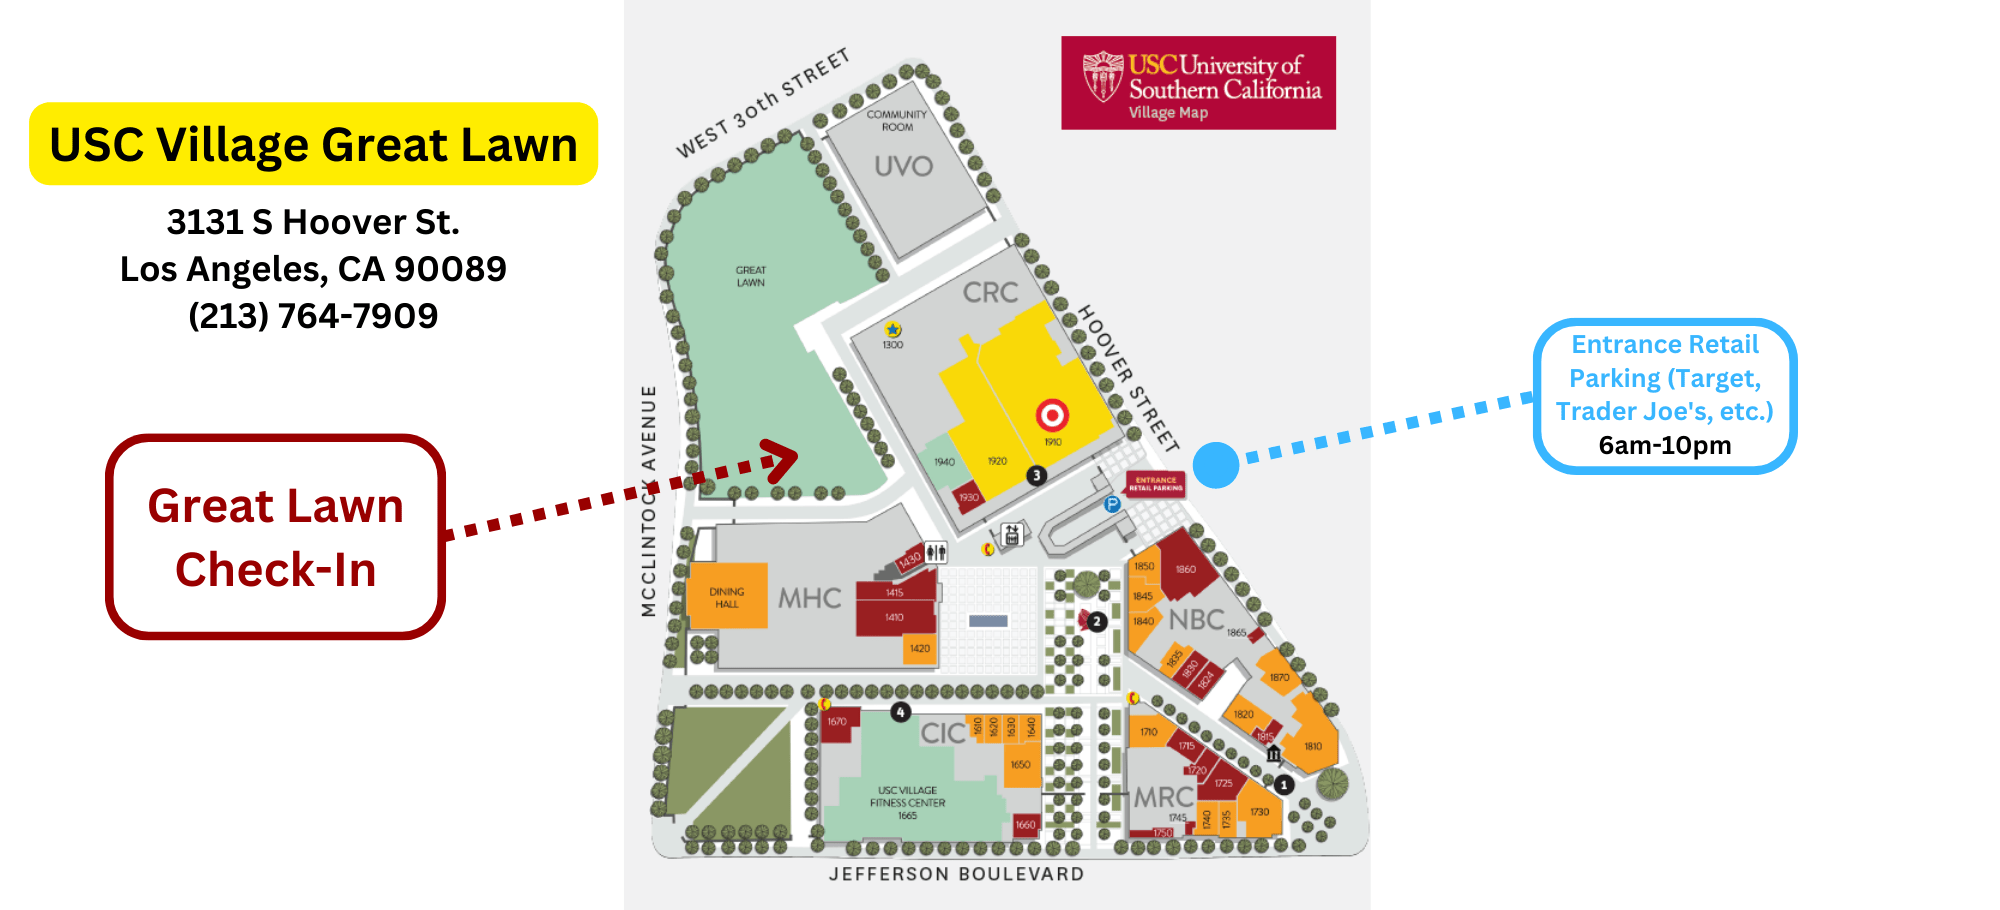 USC Summer Programs commuter student check in